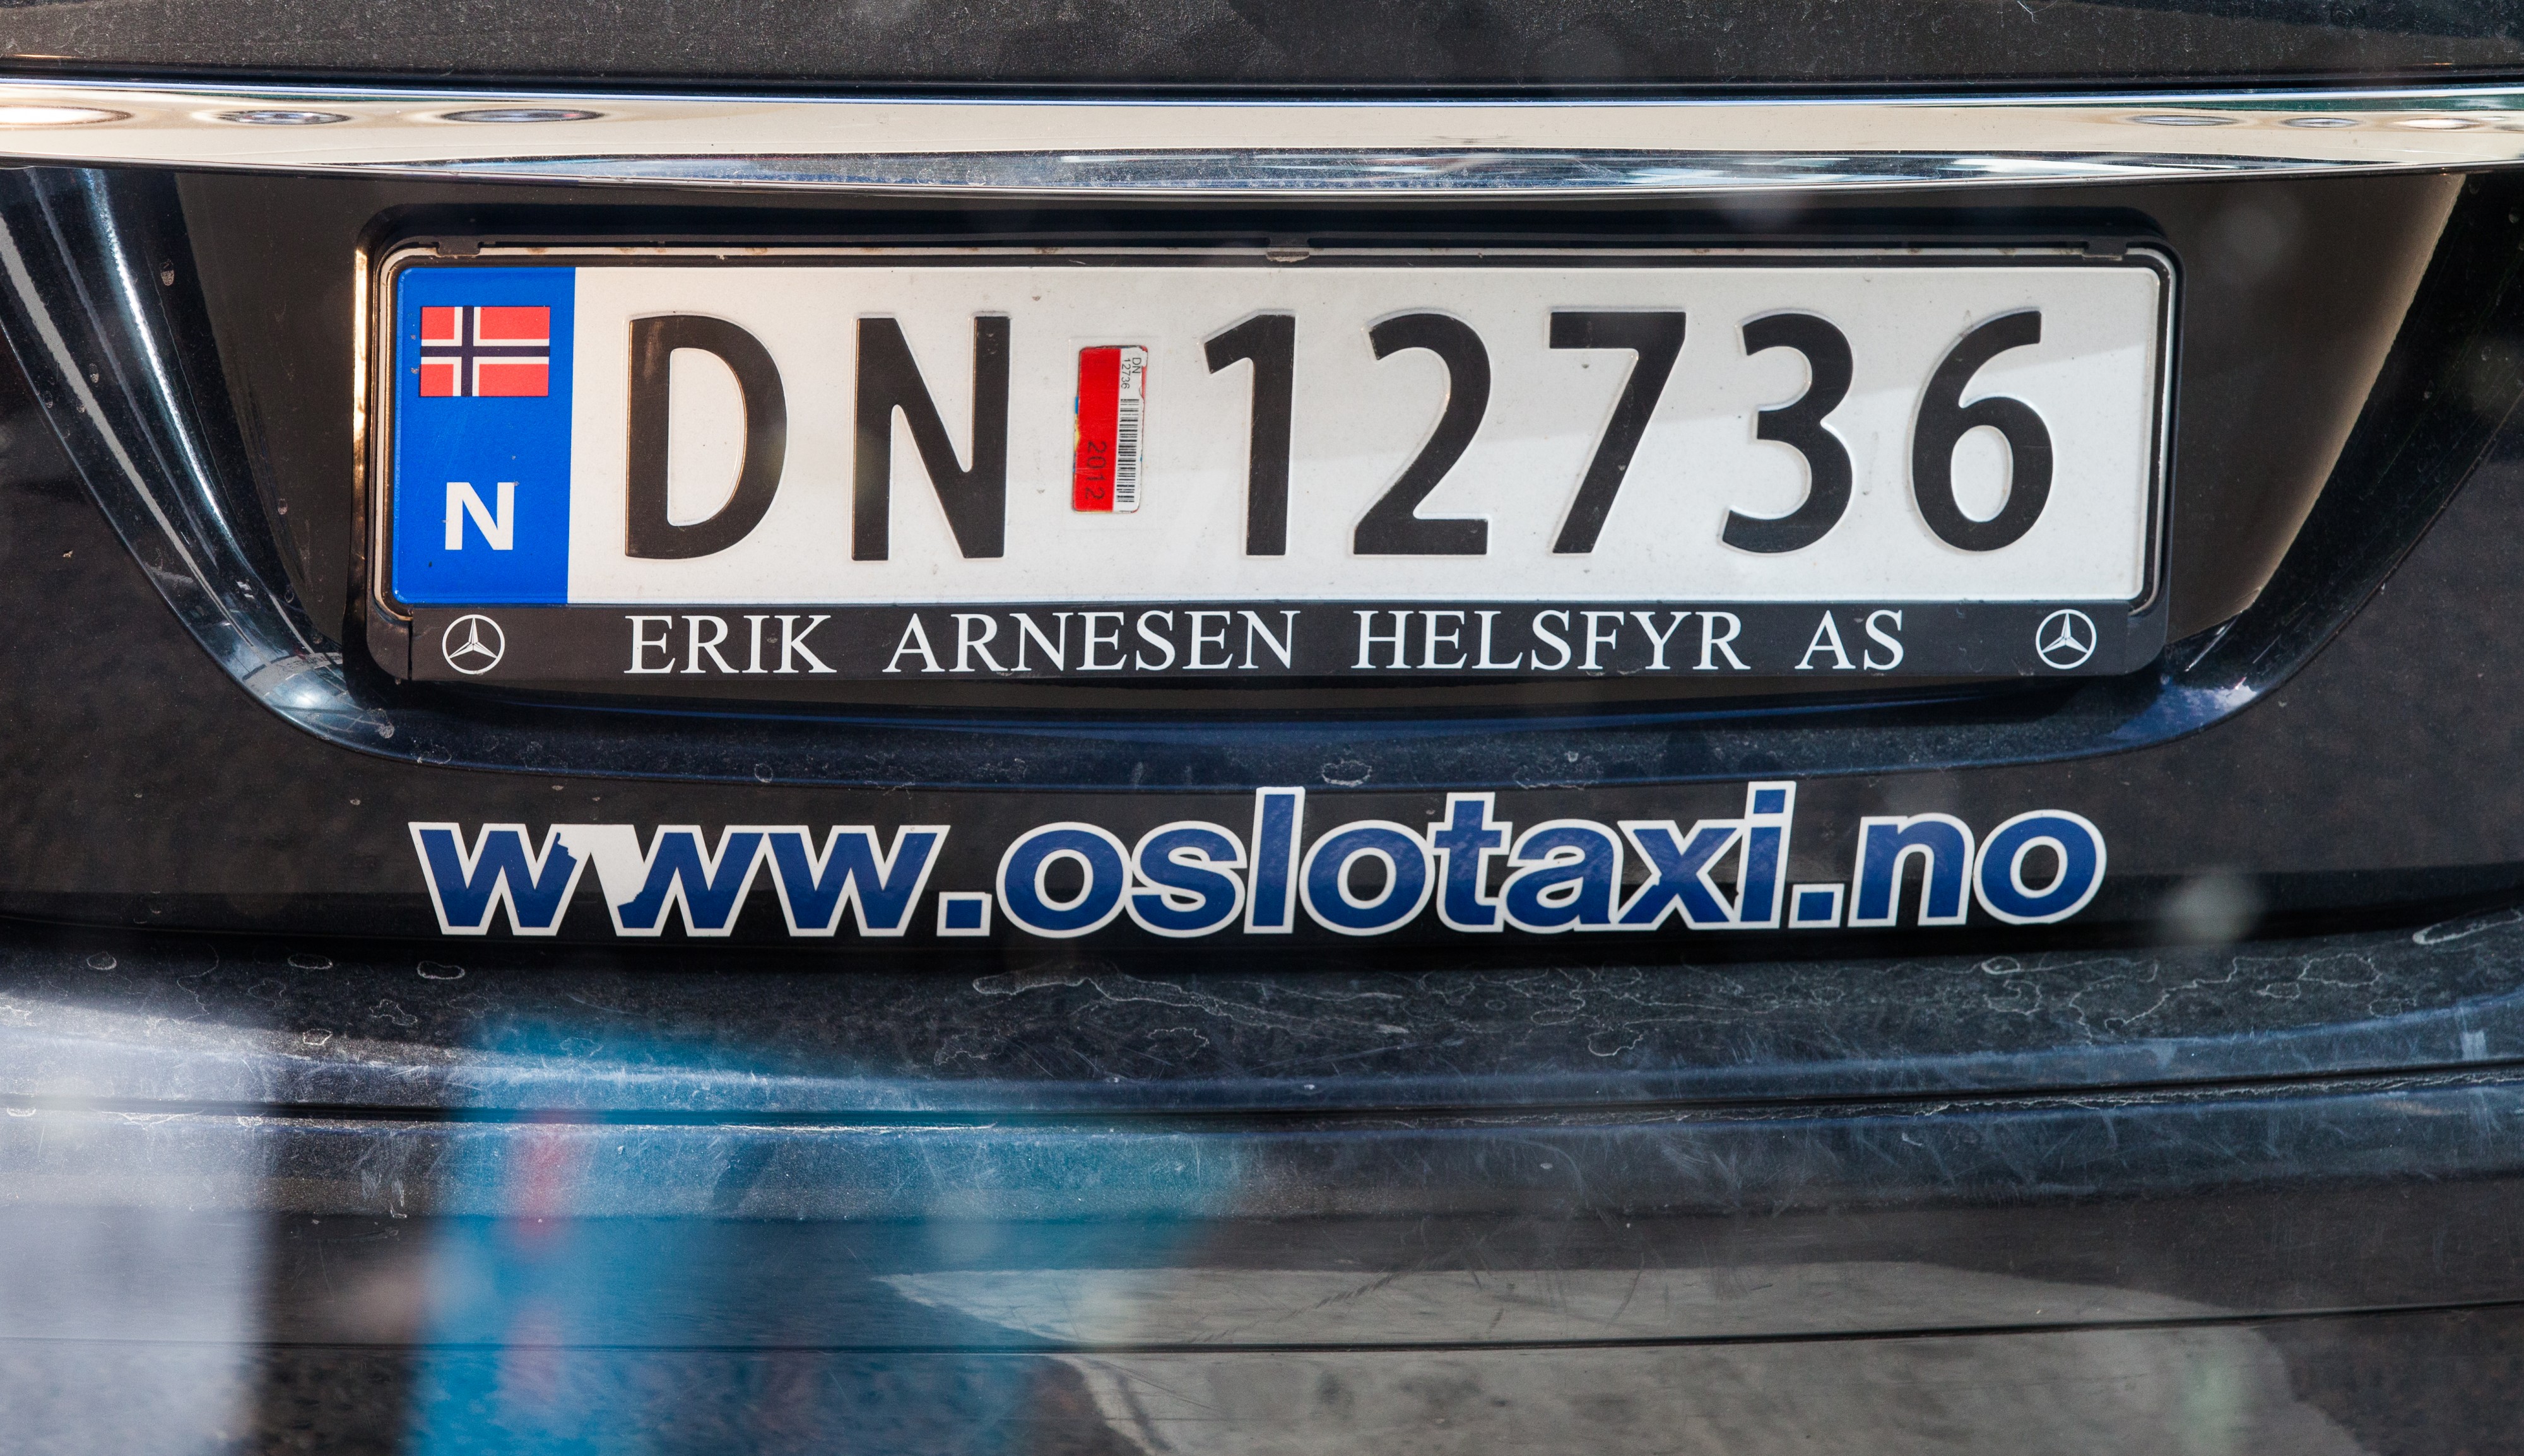 oslotaxi.no, Oslo city, Norway, June 2014, picture 30